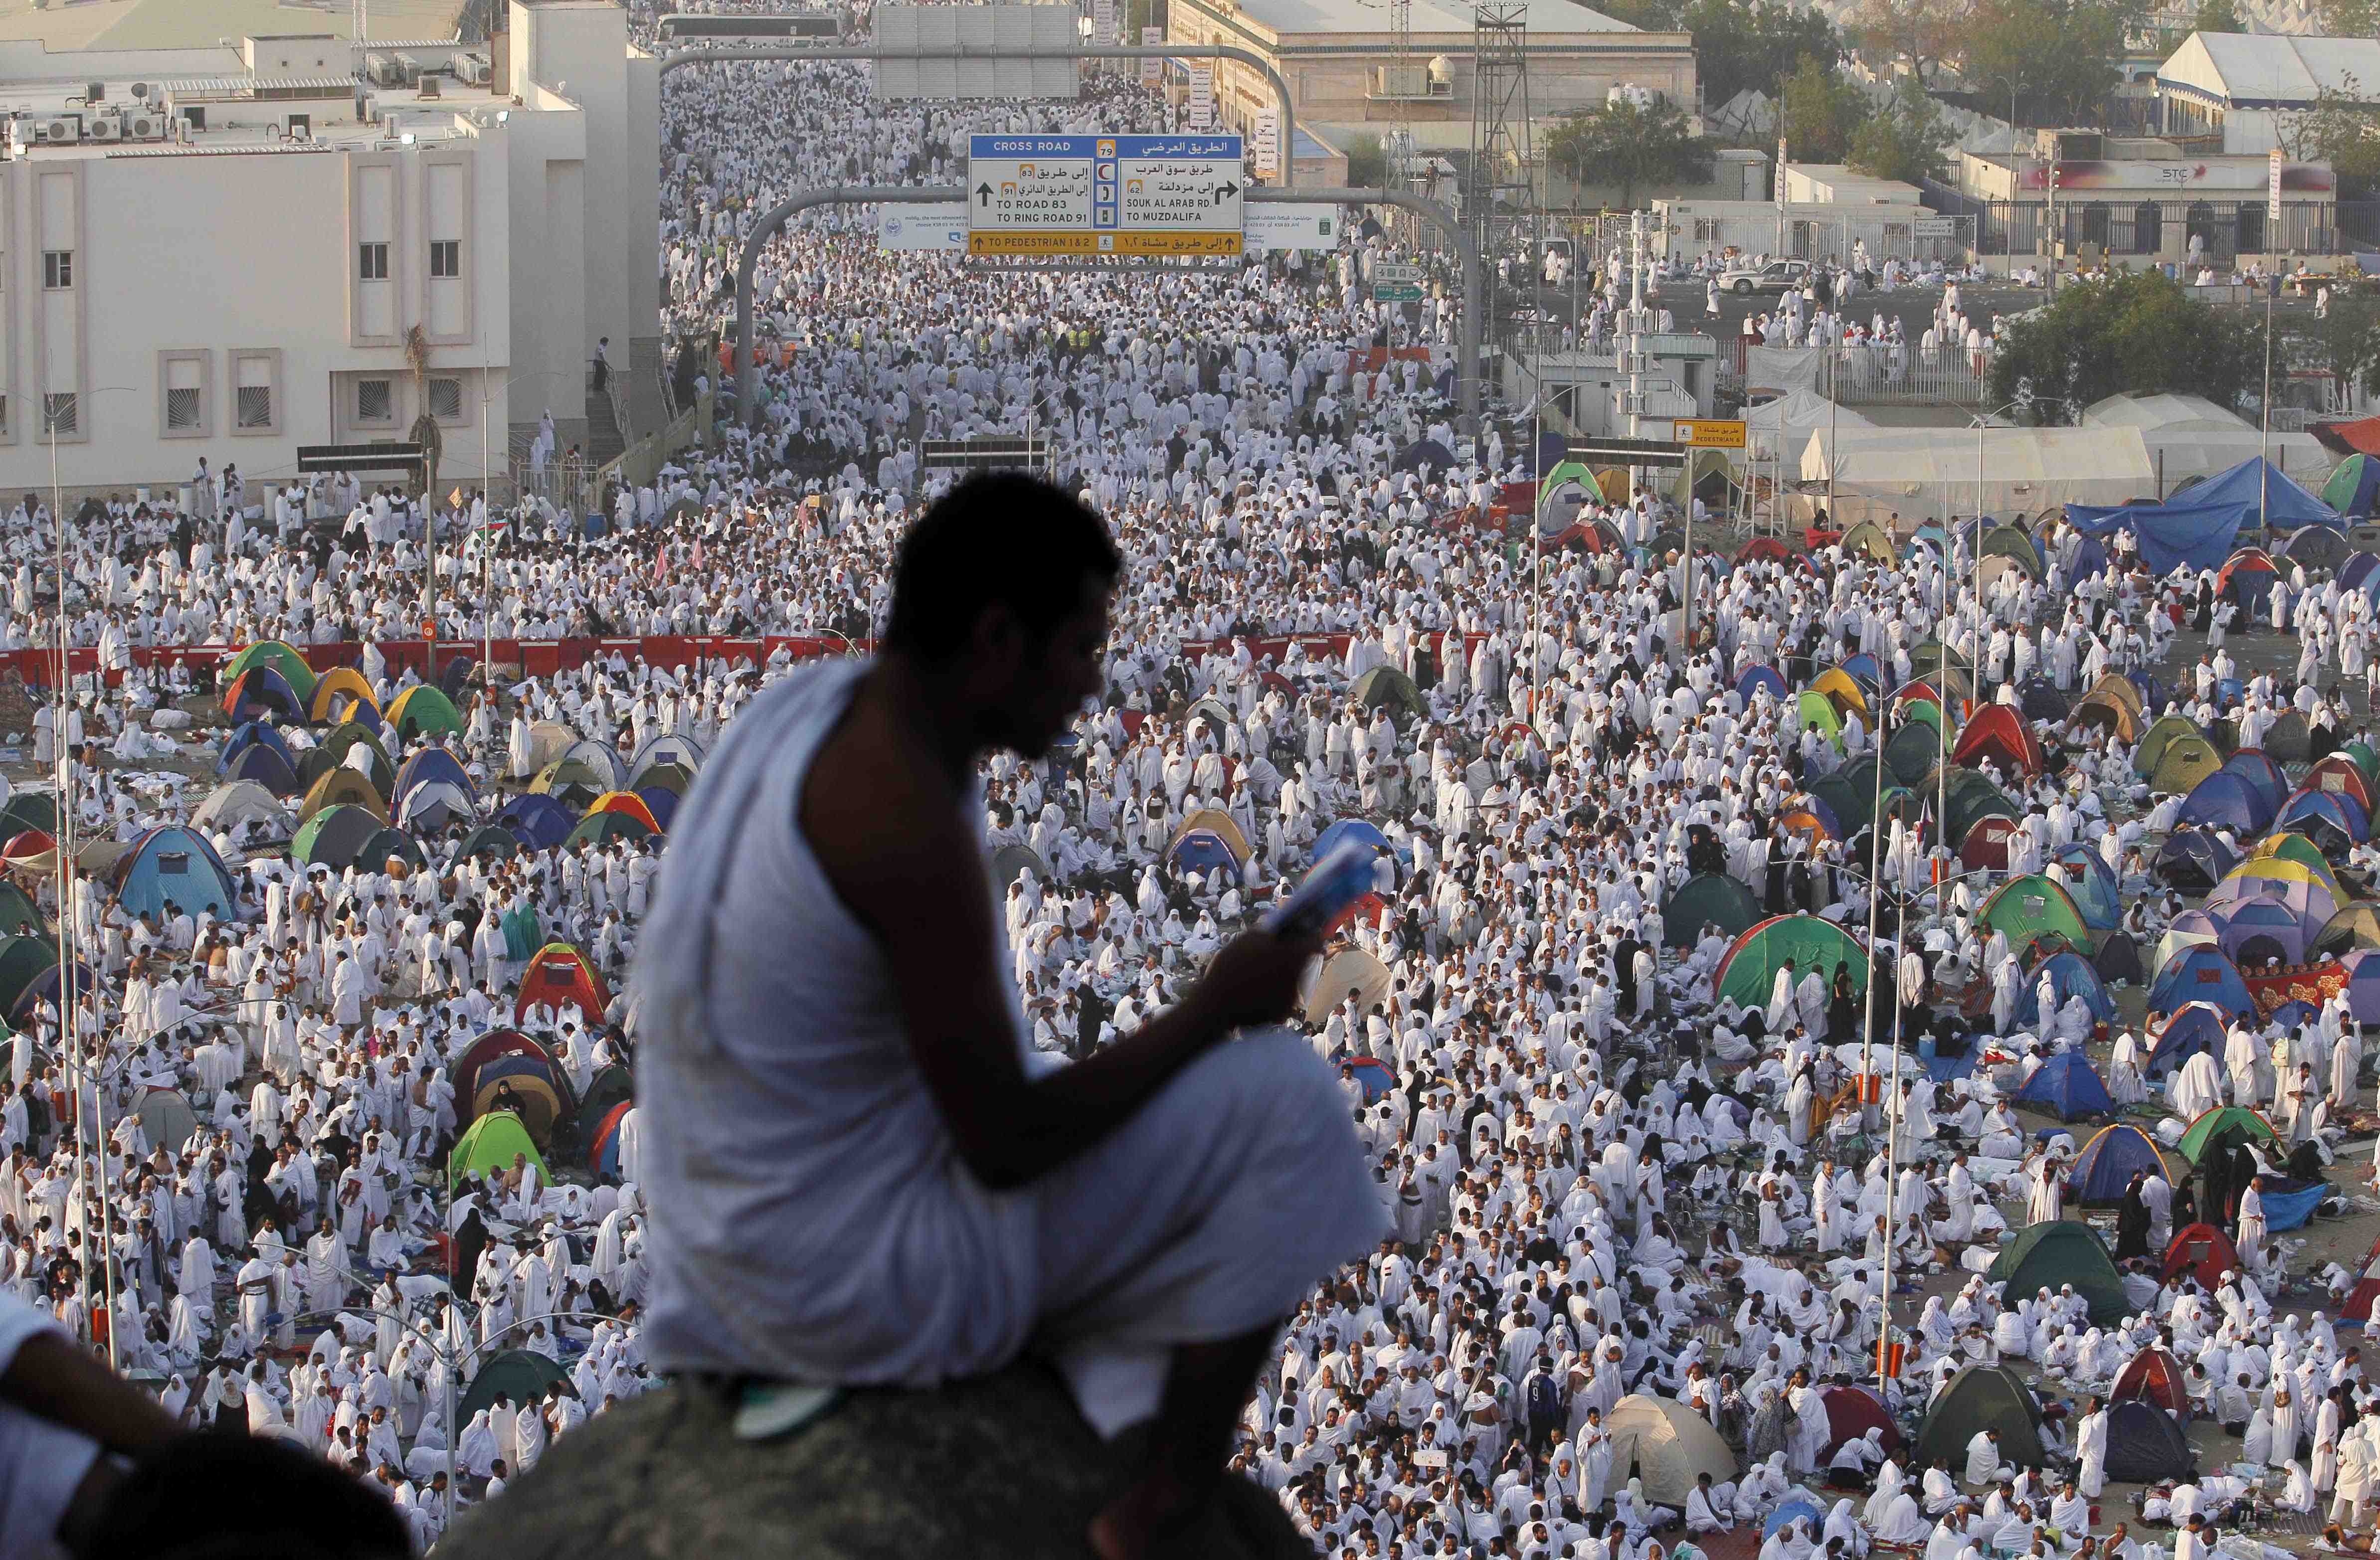 Hajj: Any Lessons to Learn?